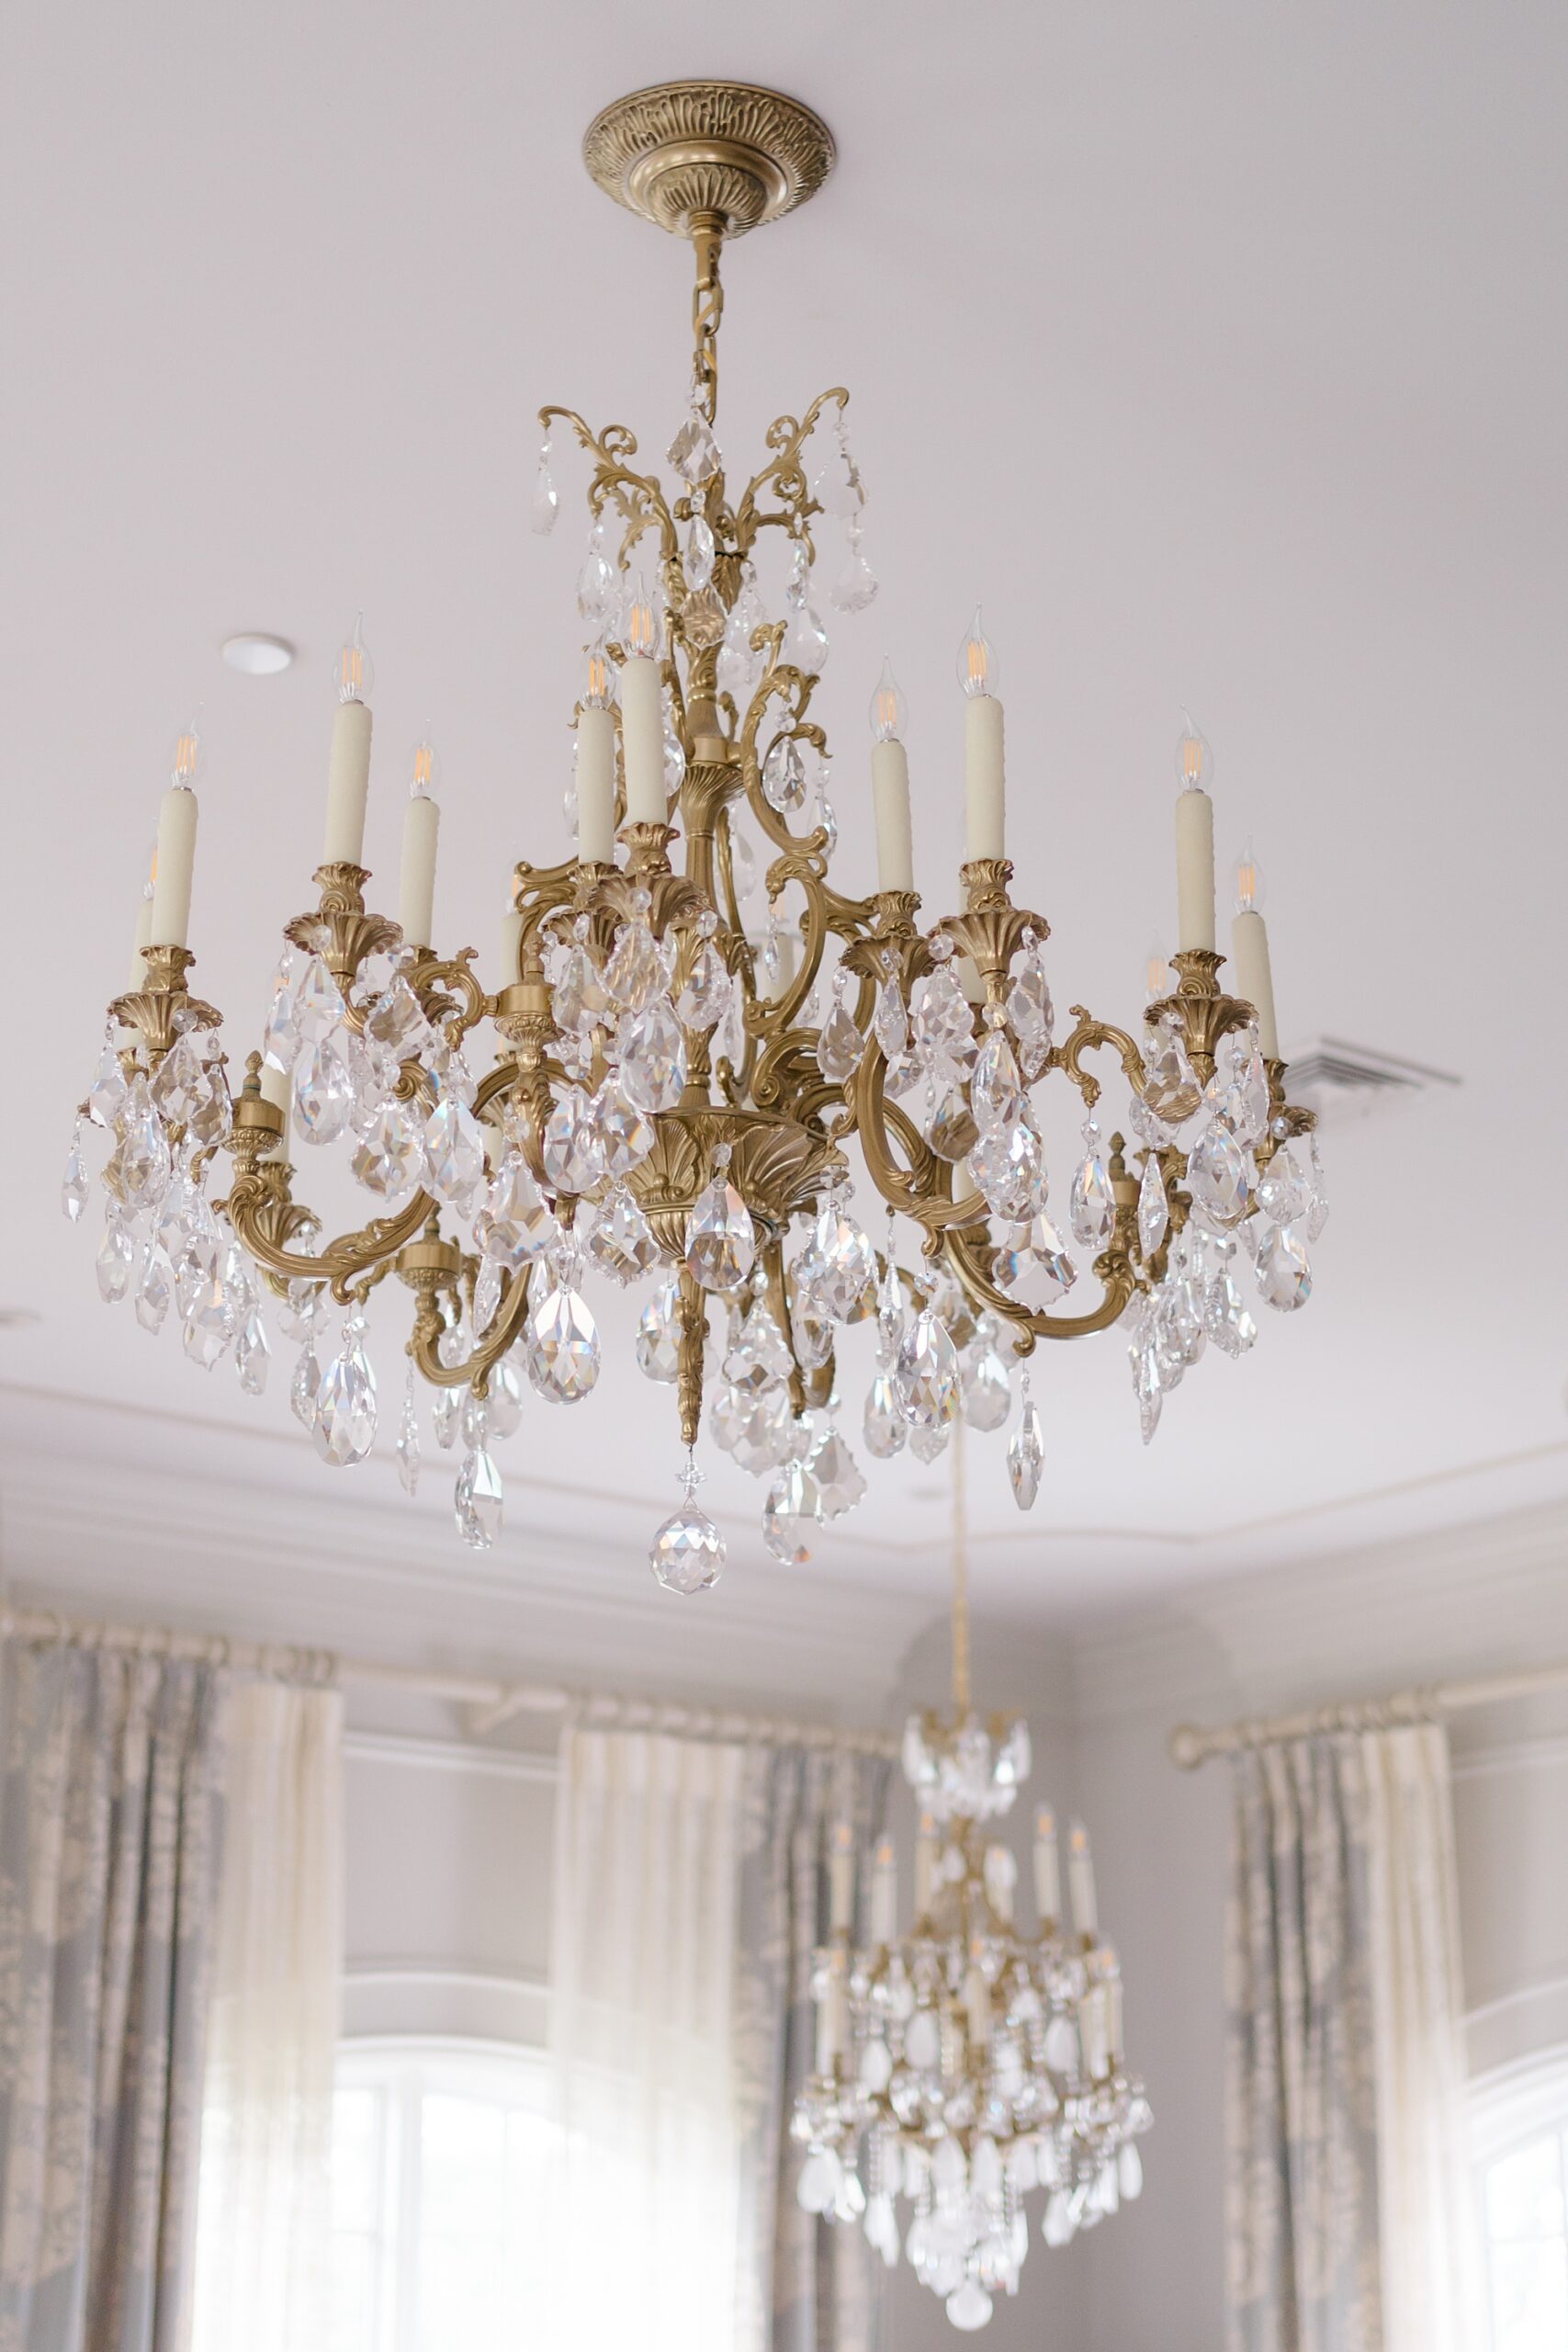 elegant chandeliers from Park Chateau wedding